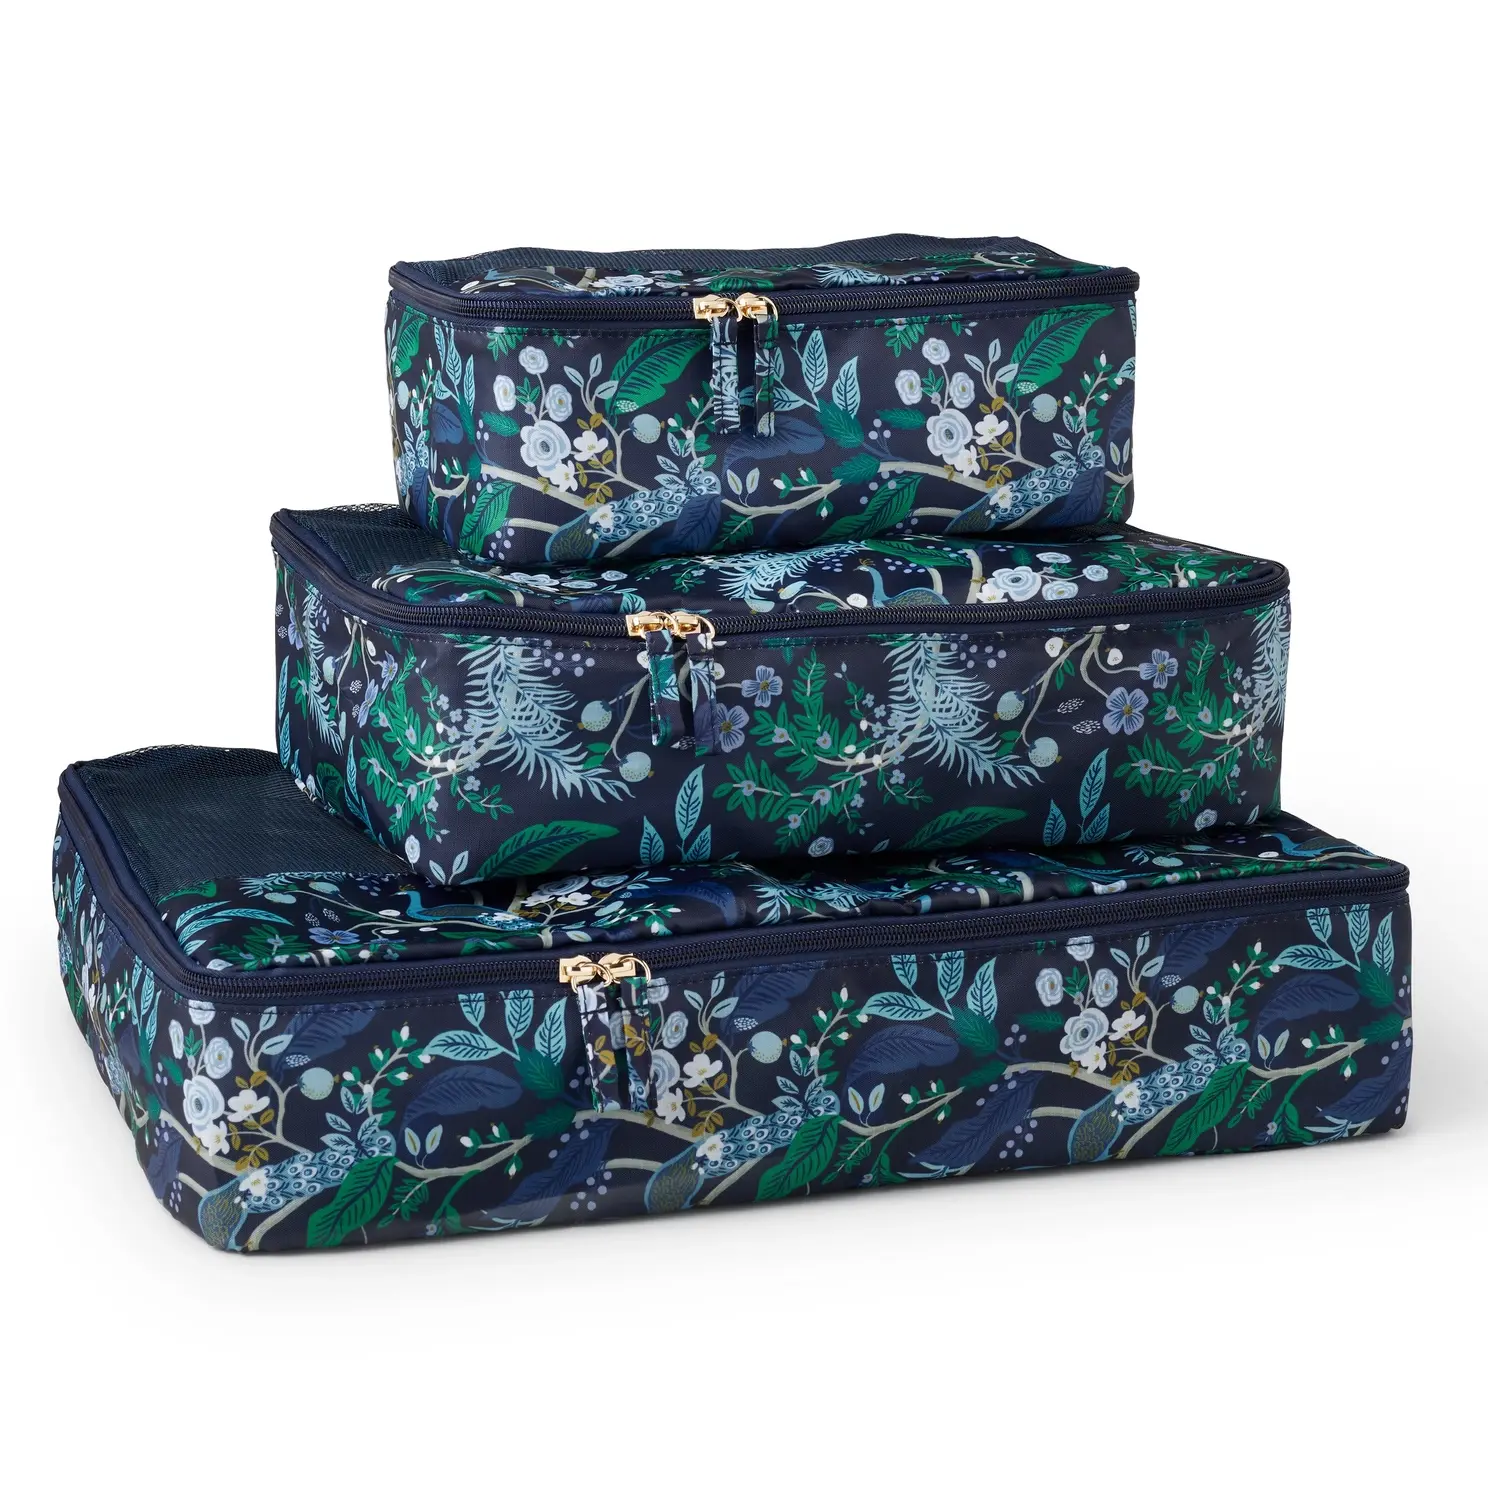 Rifle Paper Co - RP RP ST - Peacock Packing Cube Set